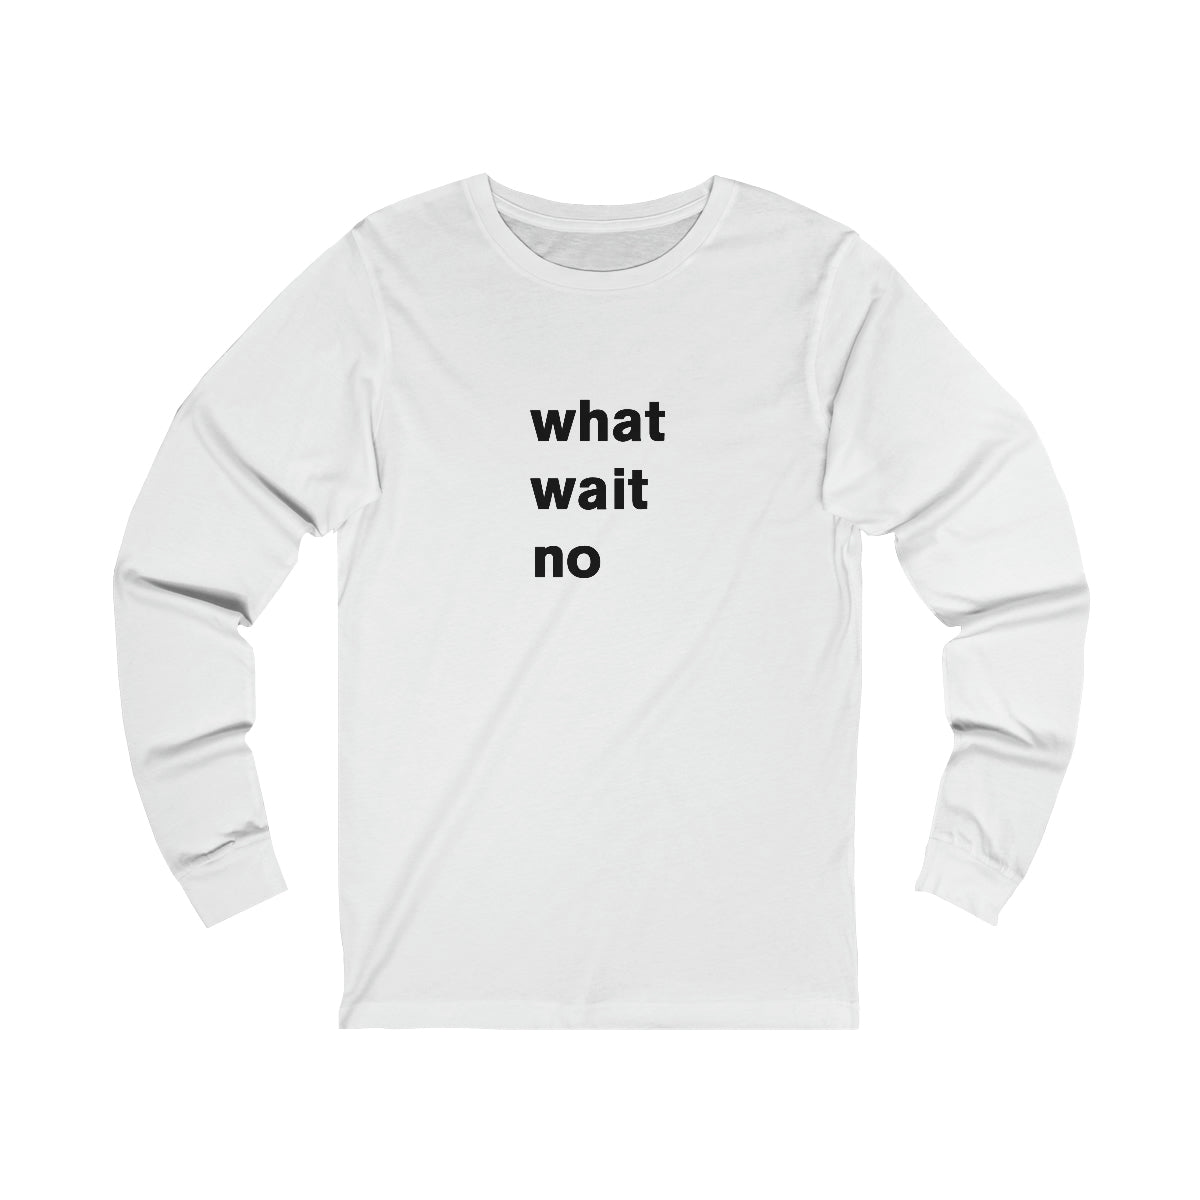 what wait no - long sleeve